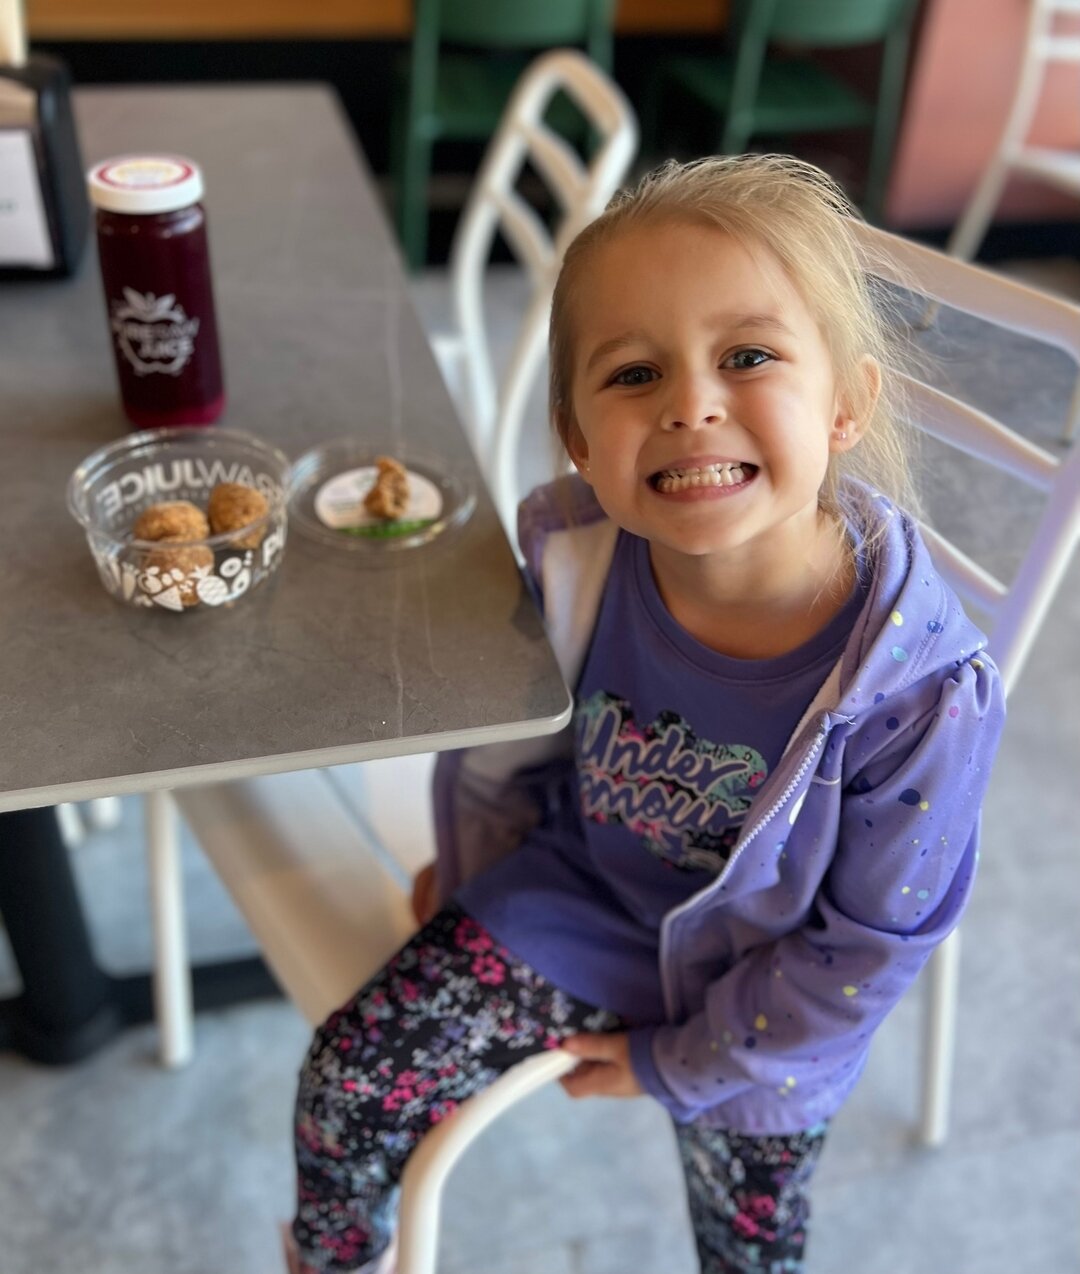 Mid-week smiles brought to you by snack time at PRJ 😎 

#snacktime #healthykiddos #healthylifestyle #choosegoodness #healthysnacks #healthyhabits